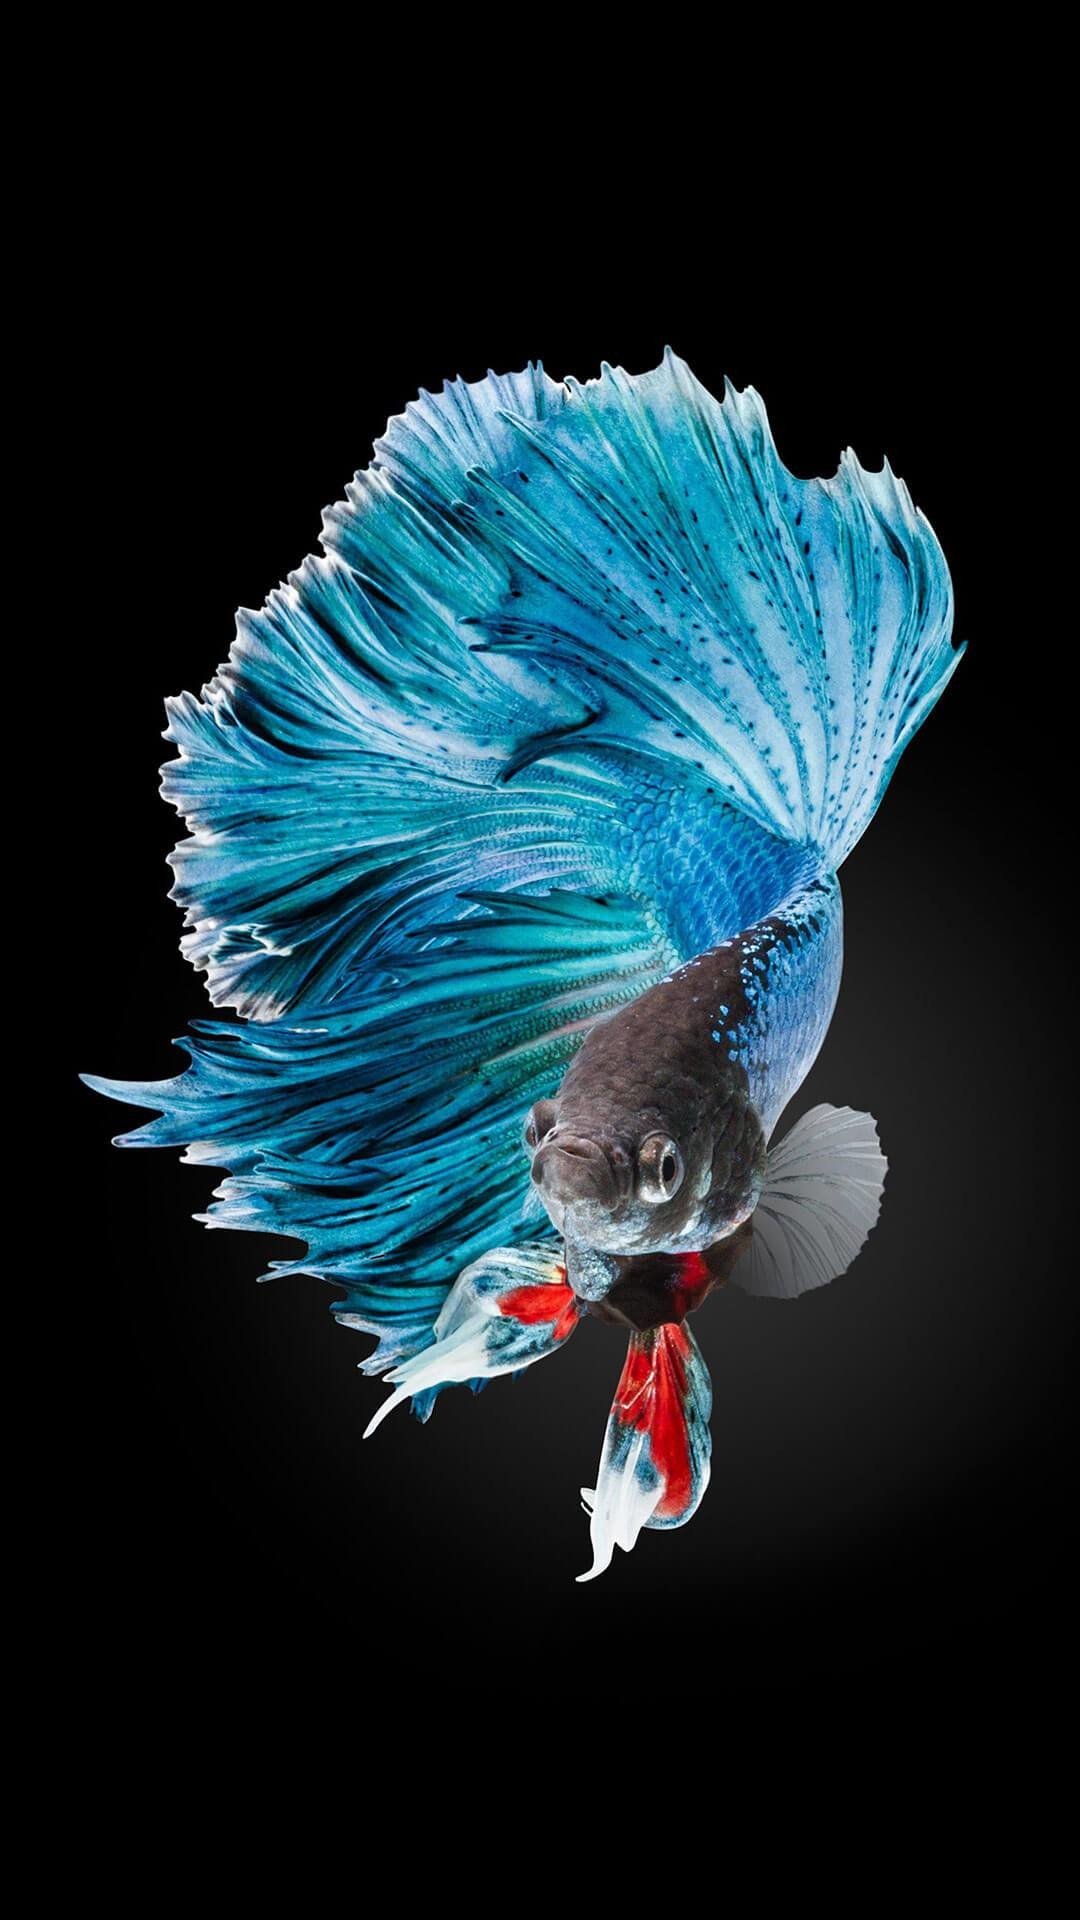 1080x1920 Wallpaper iphone live - Betta Fish Images Iphone 6 And Iphone 6s. Download